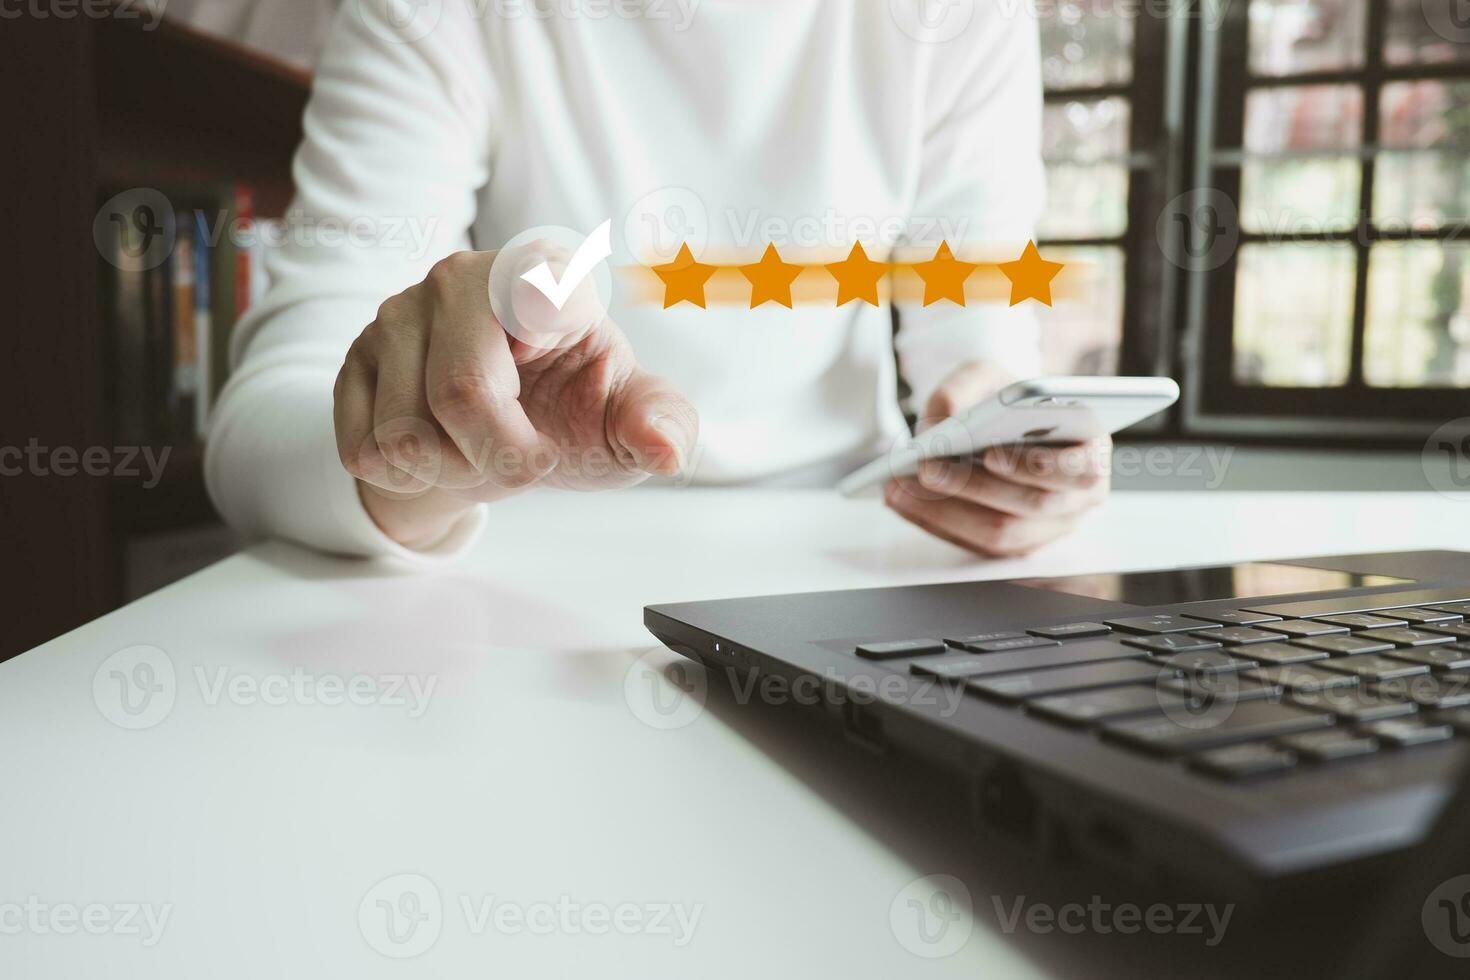 Customer satisfaction rating with smartphone, Thumbs up excellent service, Review the highest rated 5 stars, Impressed very good service, the best attention, feedback from guest. photo